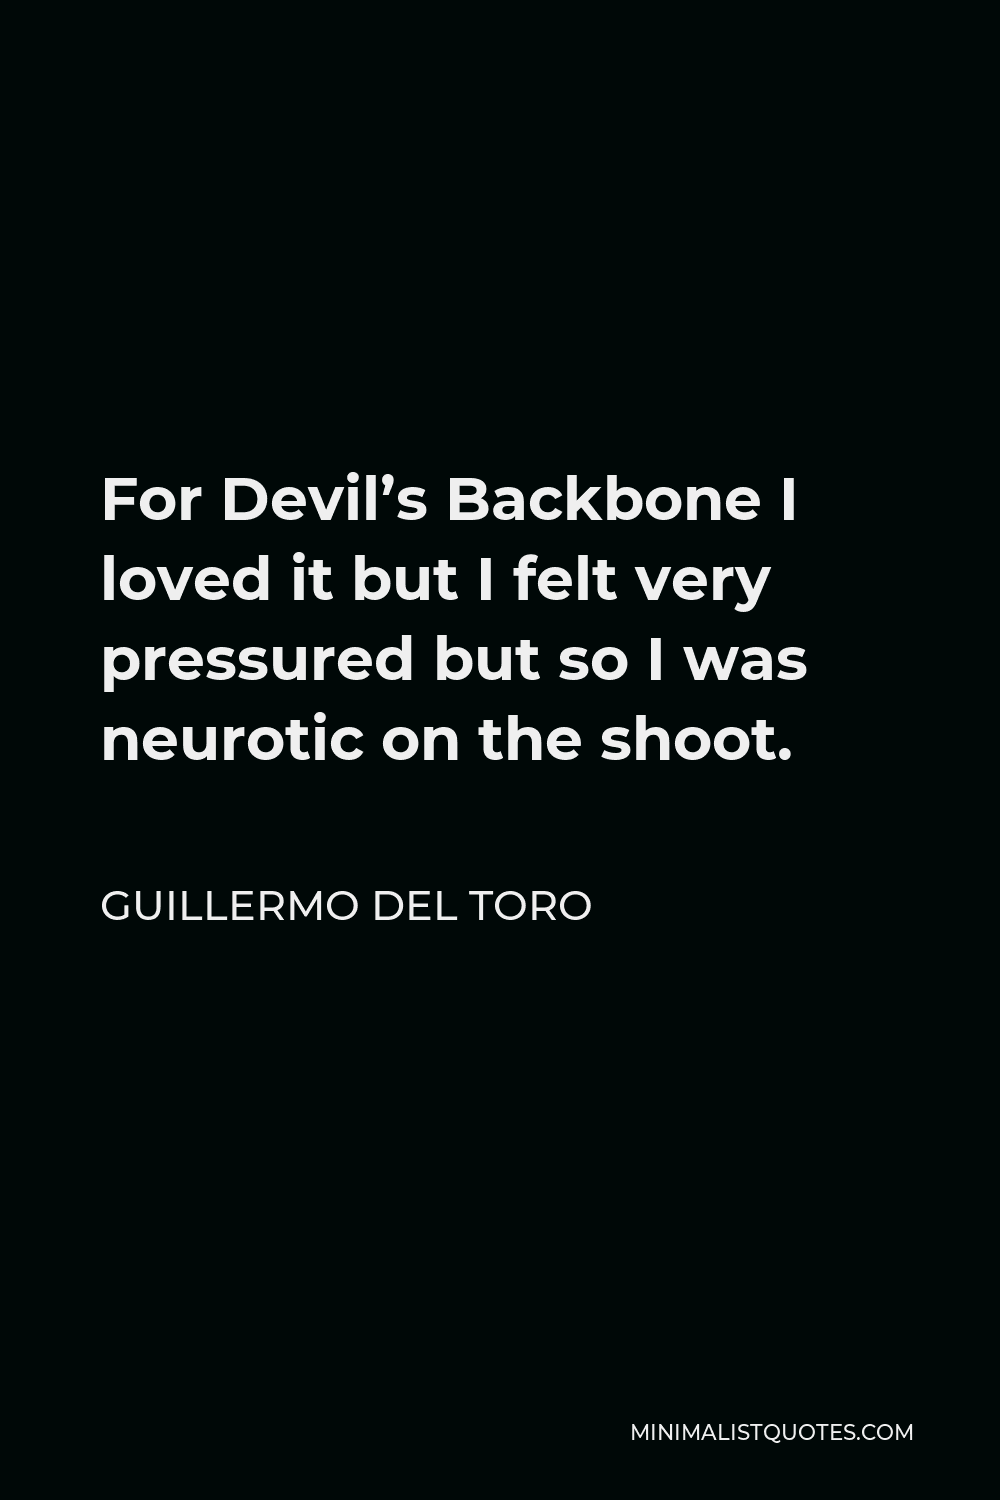 Guillermo del Toro Quote - For Devil’s Backbone I loved it but I felt very pressured but so I was neurotic on the shoot.